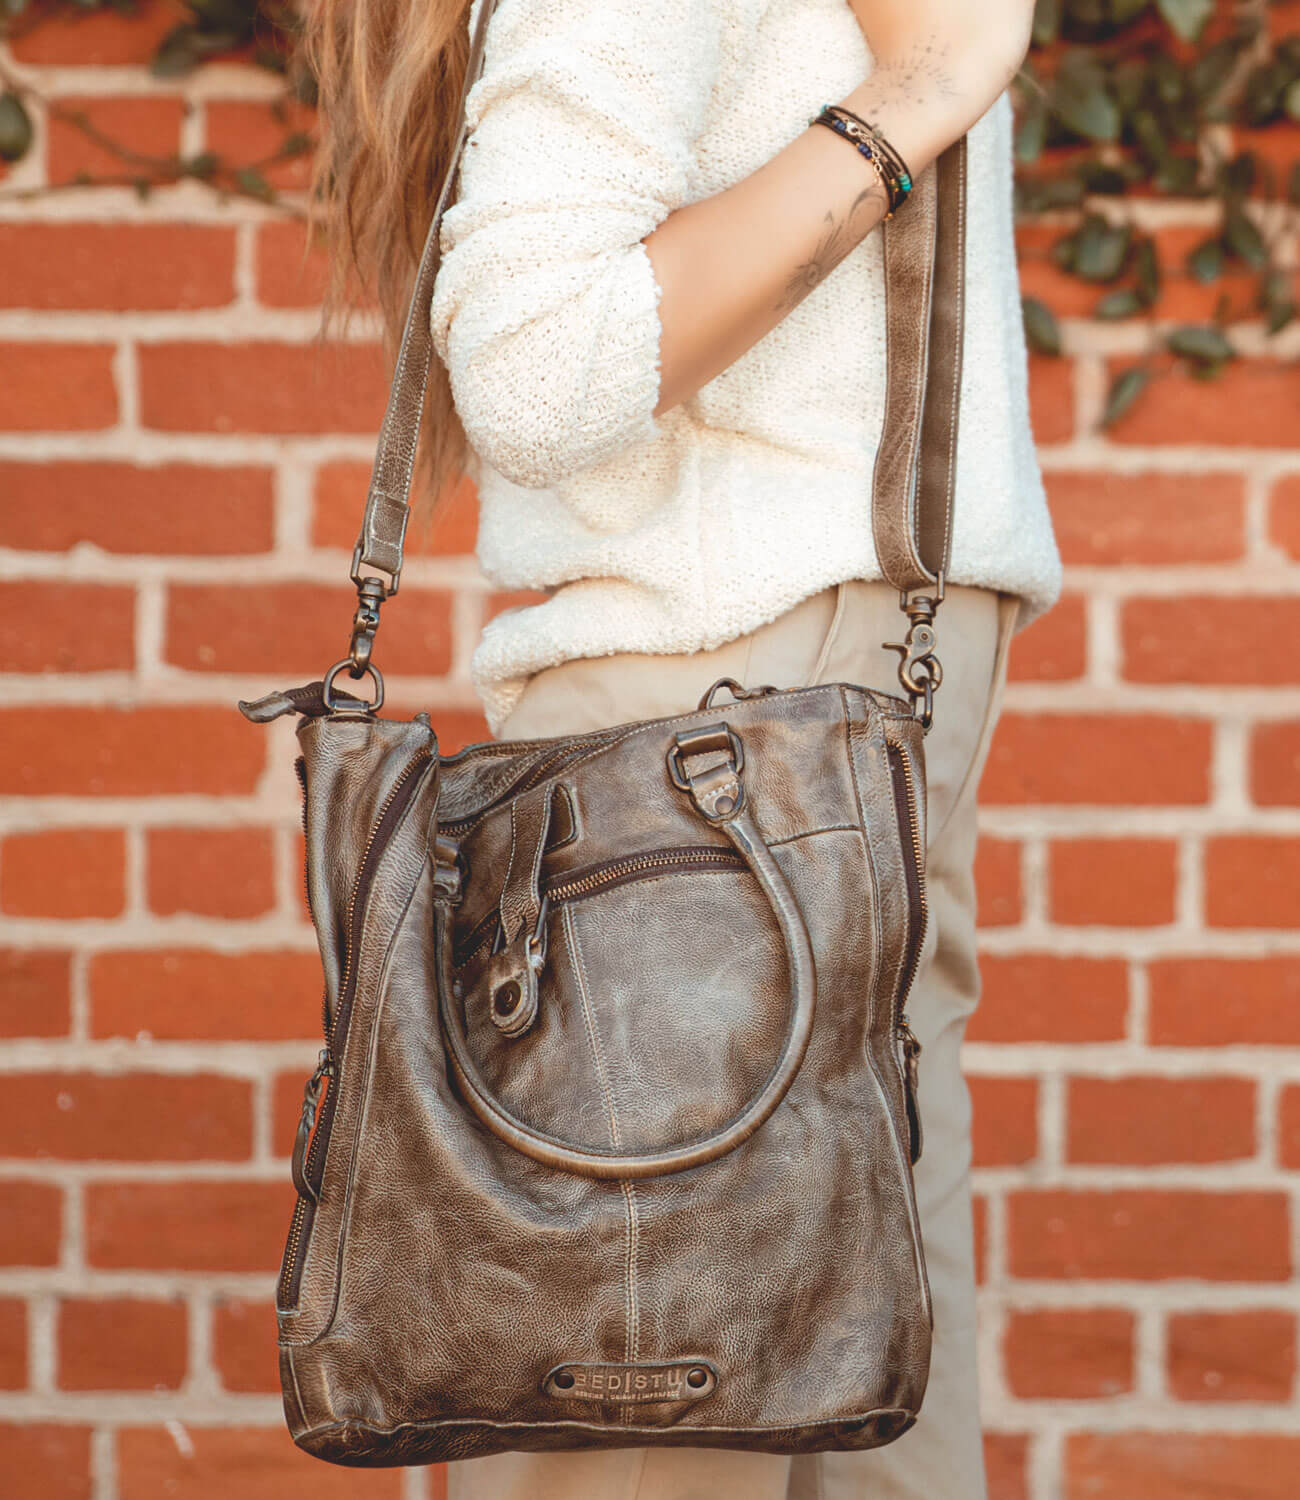 A woman holding a Bed Stu Mildred handbag in front of a brick wall.